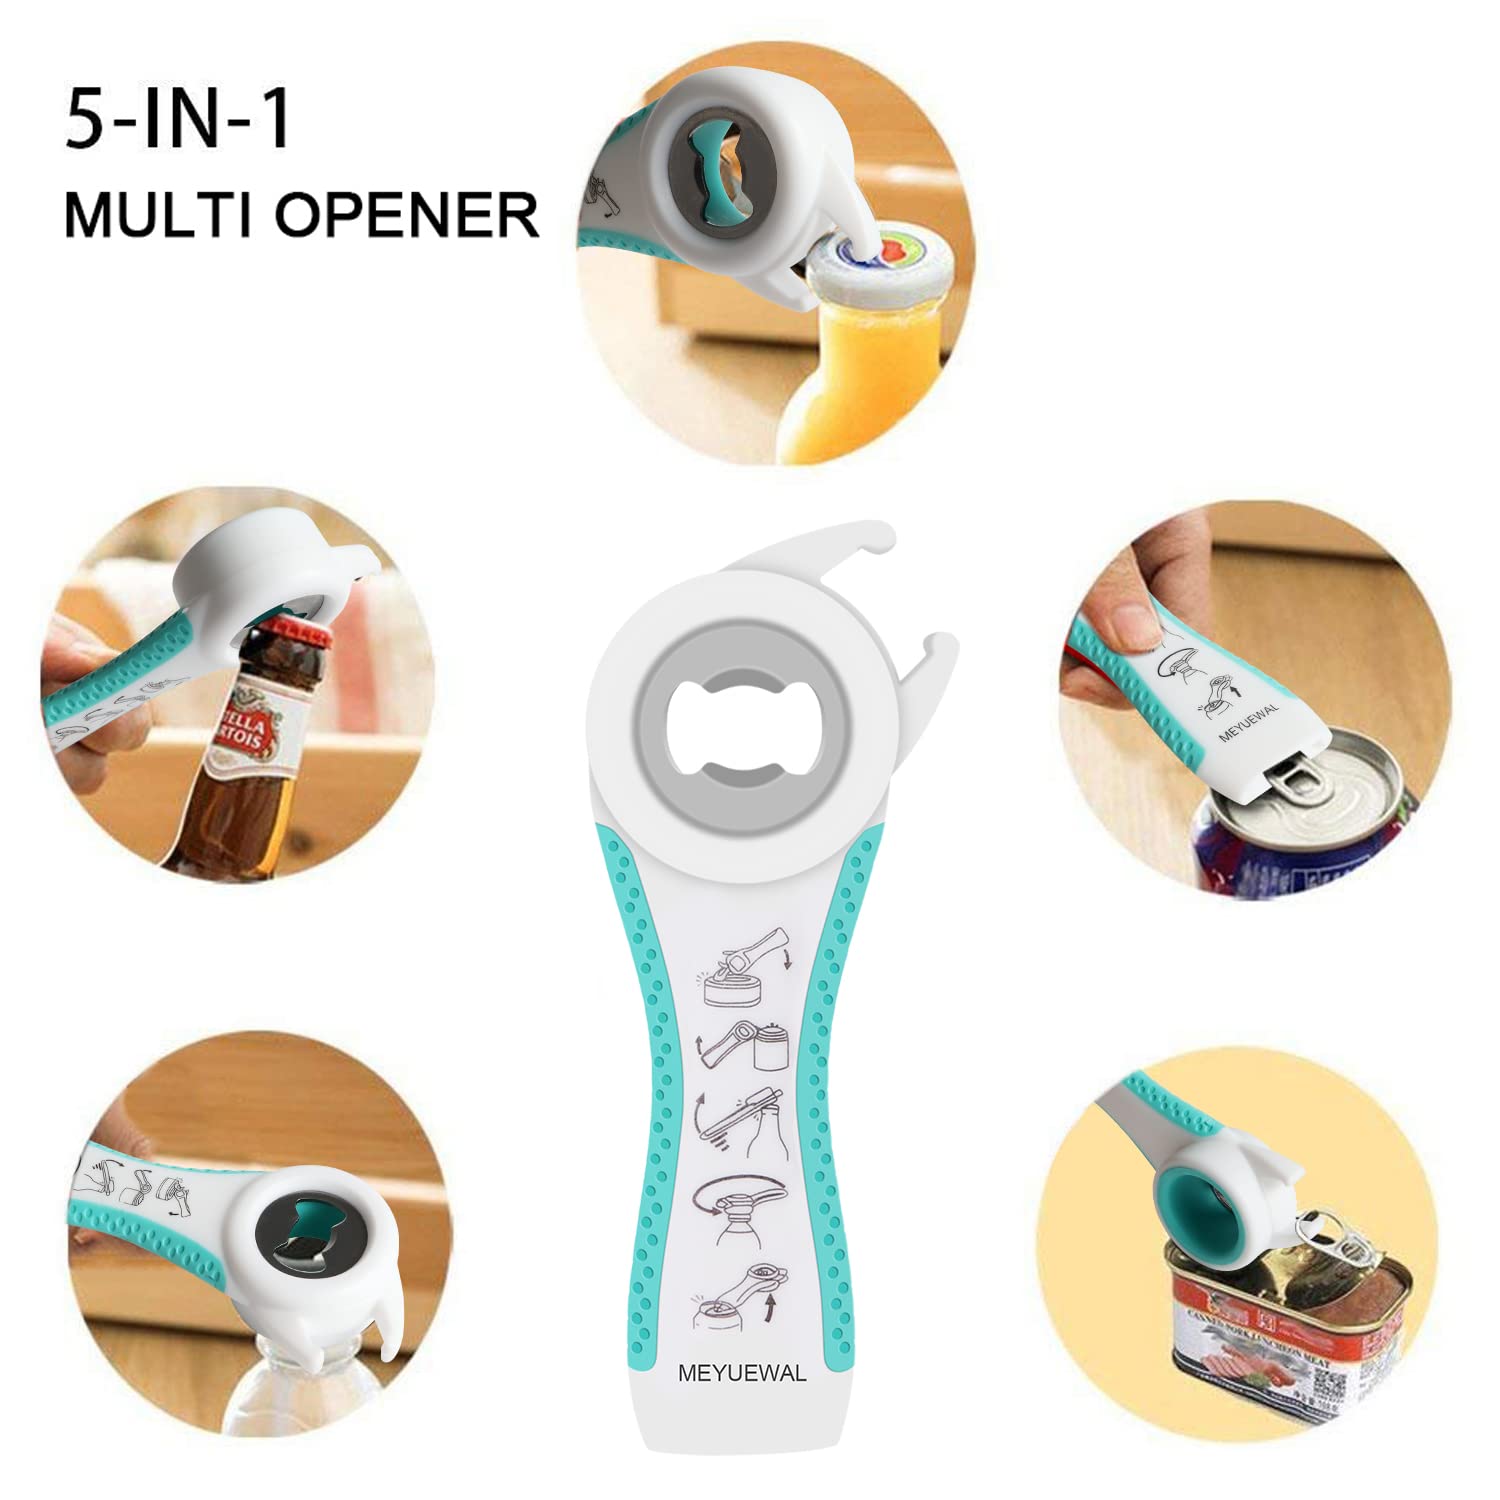 MEYUEWAL Jar Opener for Weak Hands - 5 in 1 Multi Function Can Opener Bottle Opener Kit with Silicone Handle Easy to Use for Children, Elderly and Arthritis Sufferers (White Green）